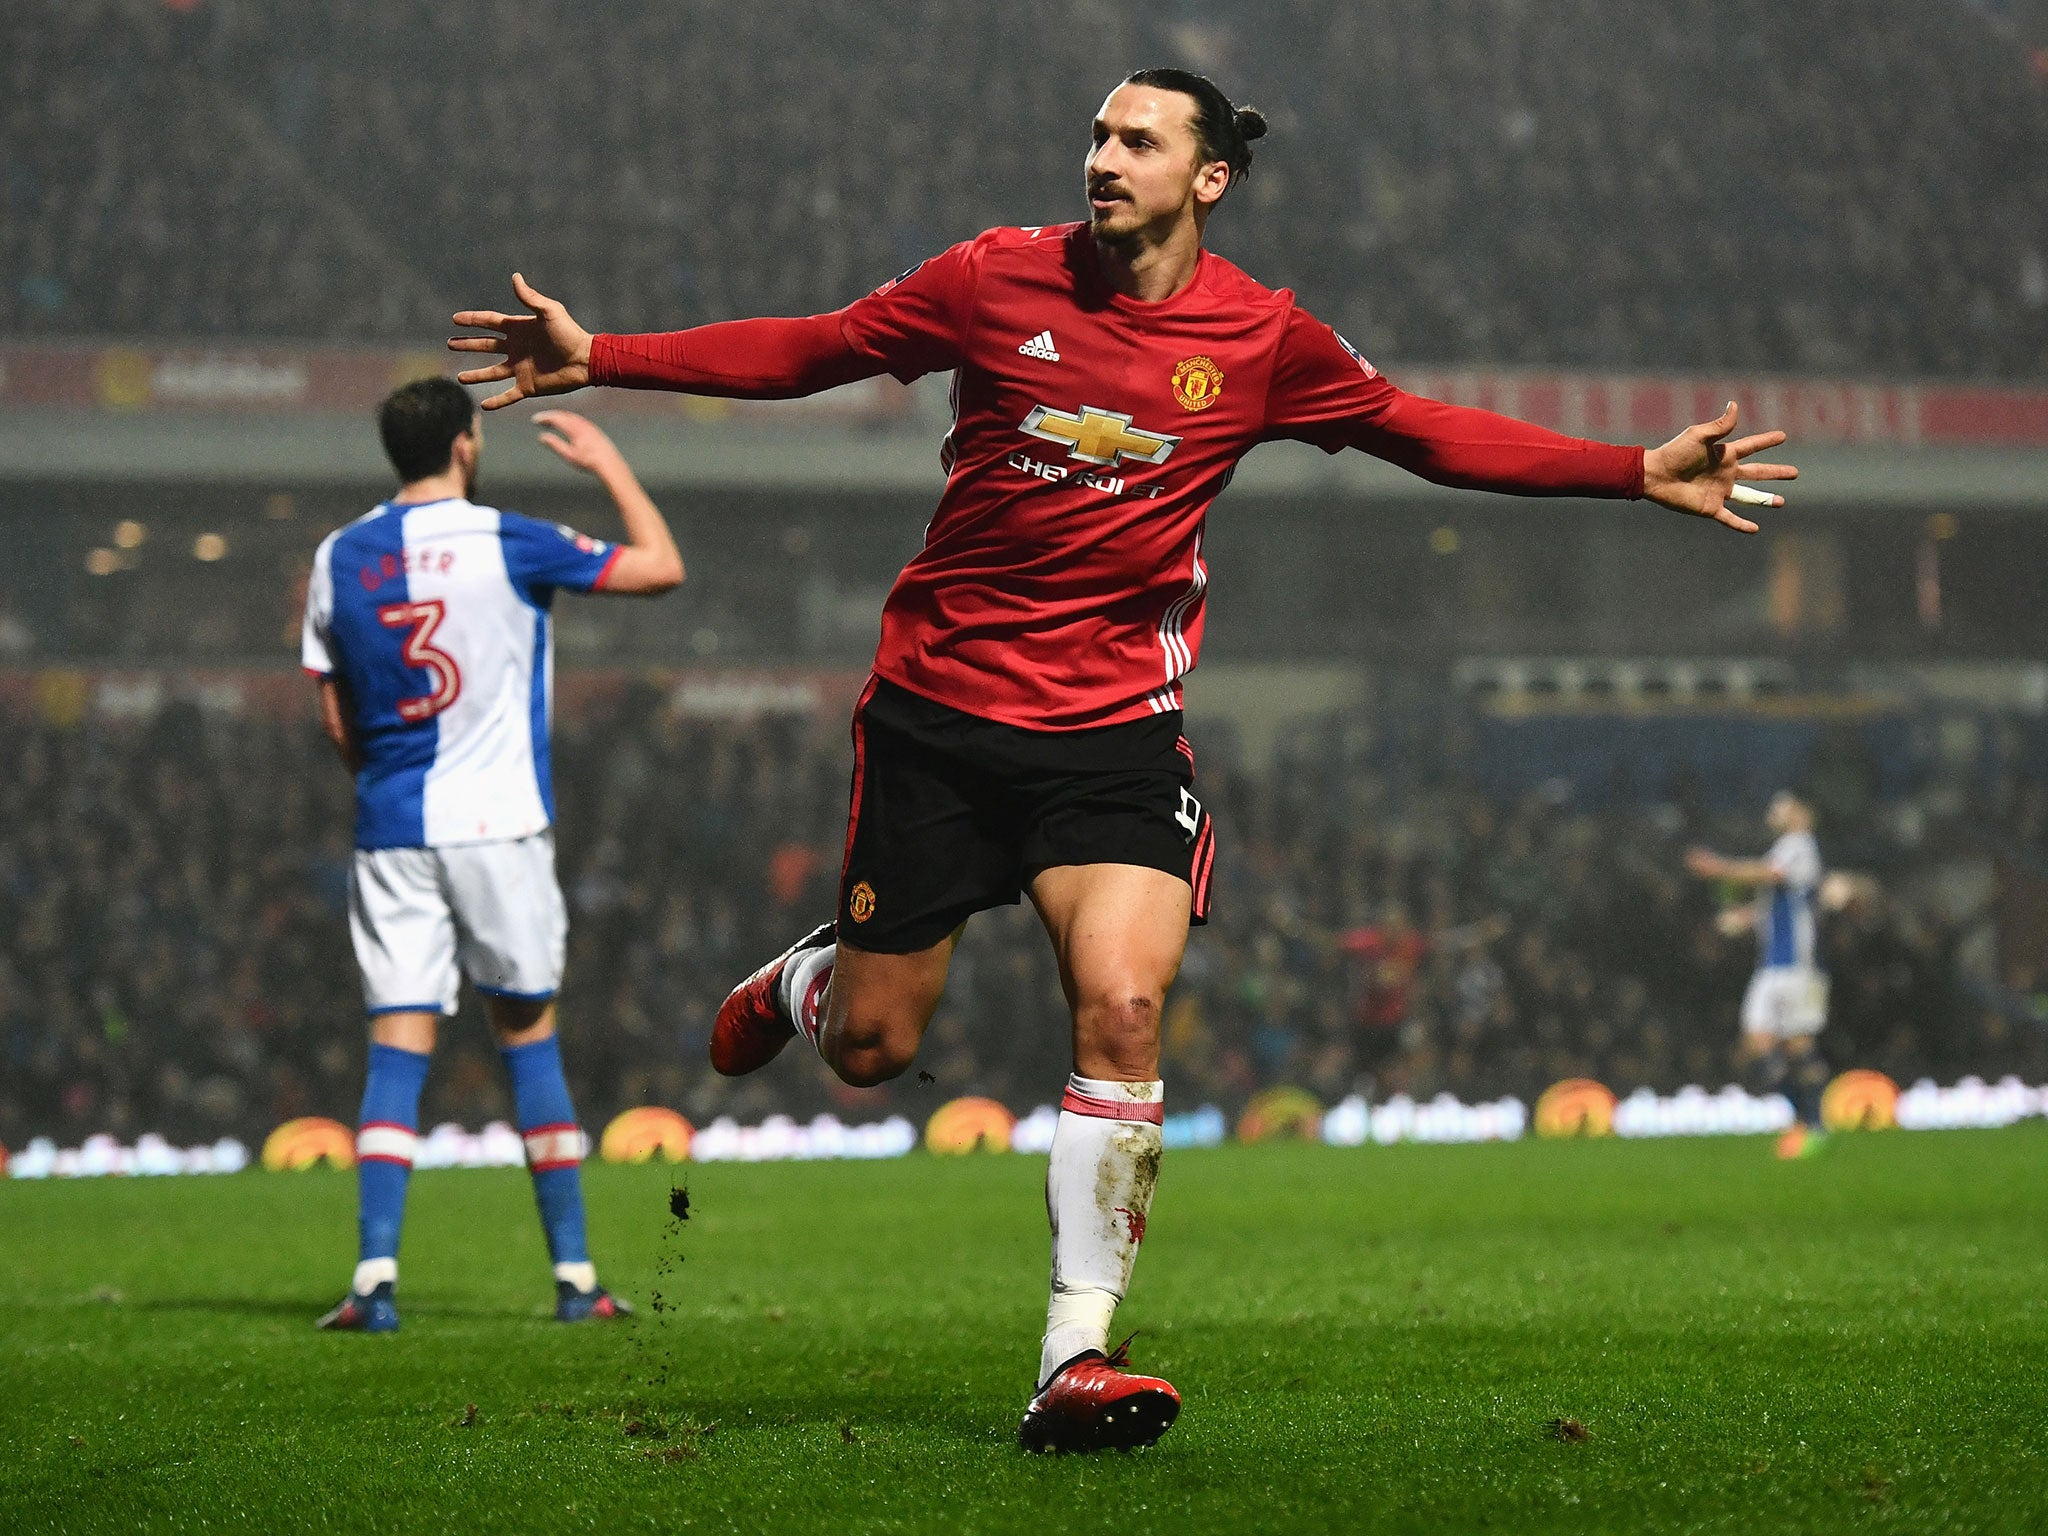 The Swede celebrates after scoring in United's recent FA Cup victory over Blackburn